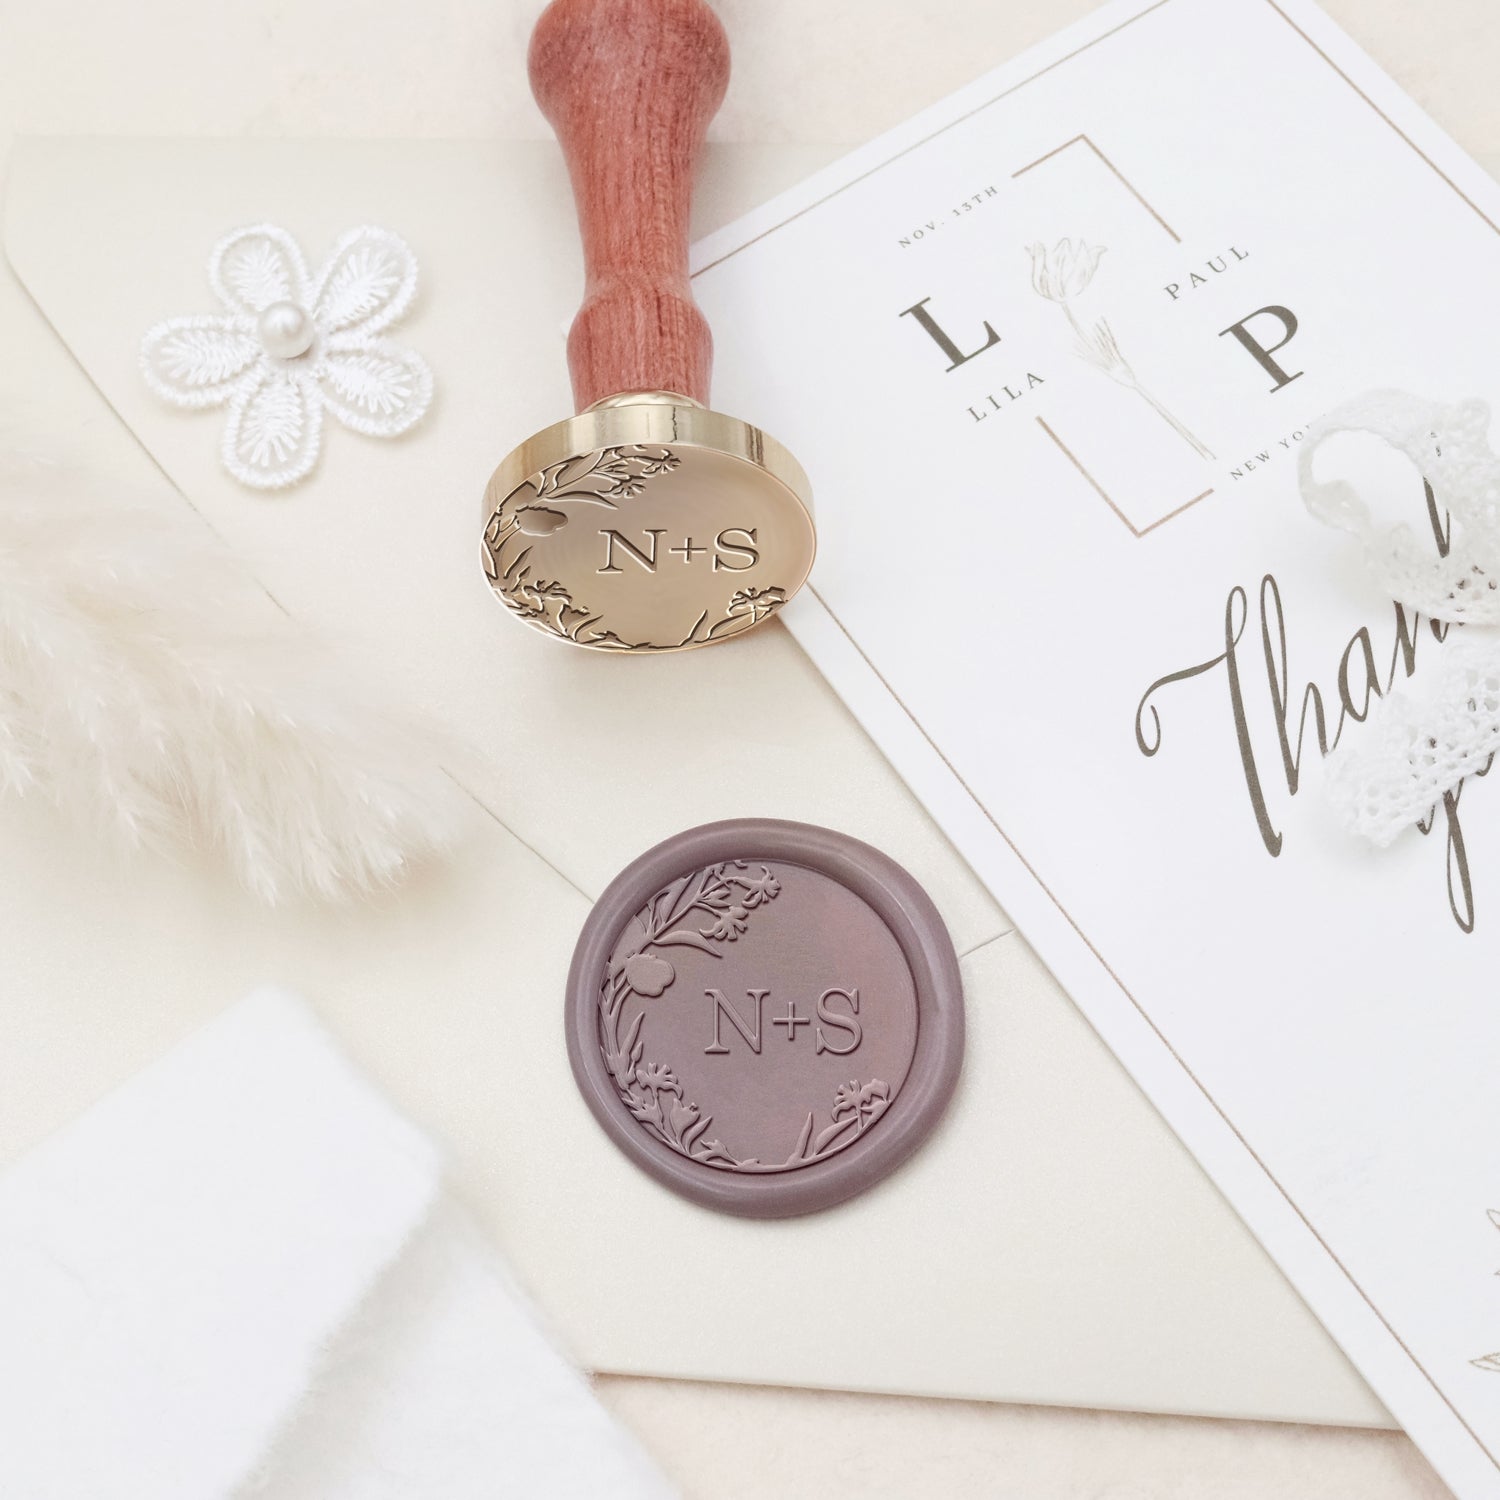 Simple Plant Circle Wedding Custom Wax Seal Stamp with Double Initials -  Wedding Invitation